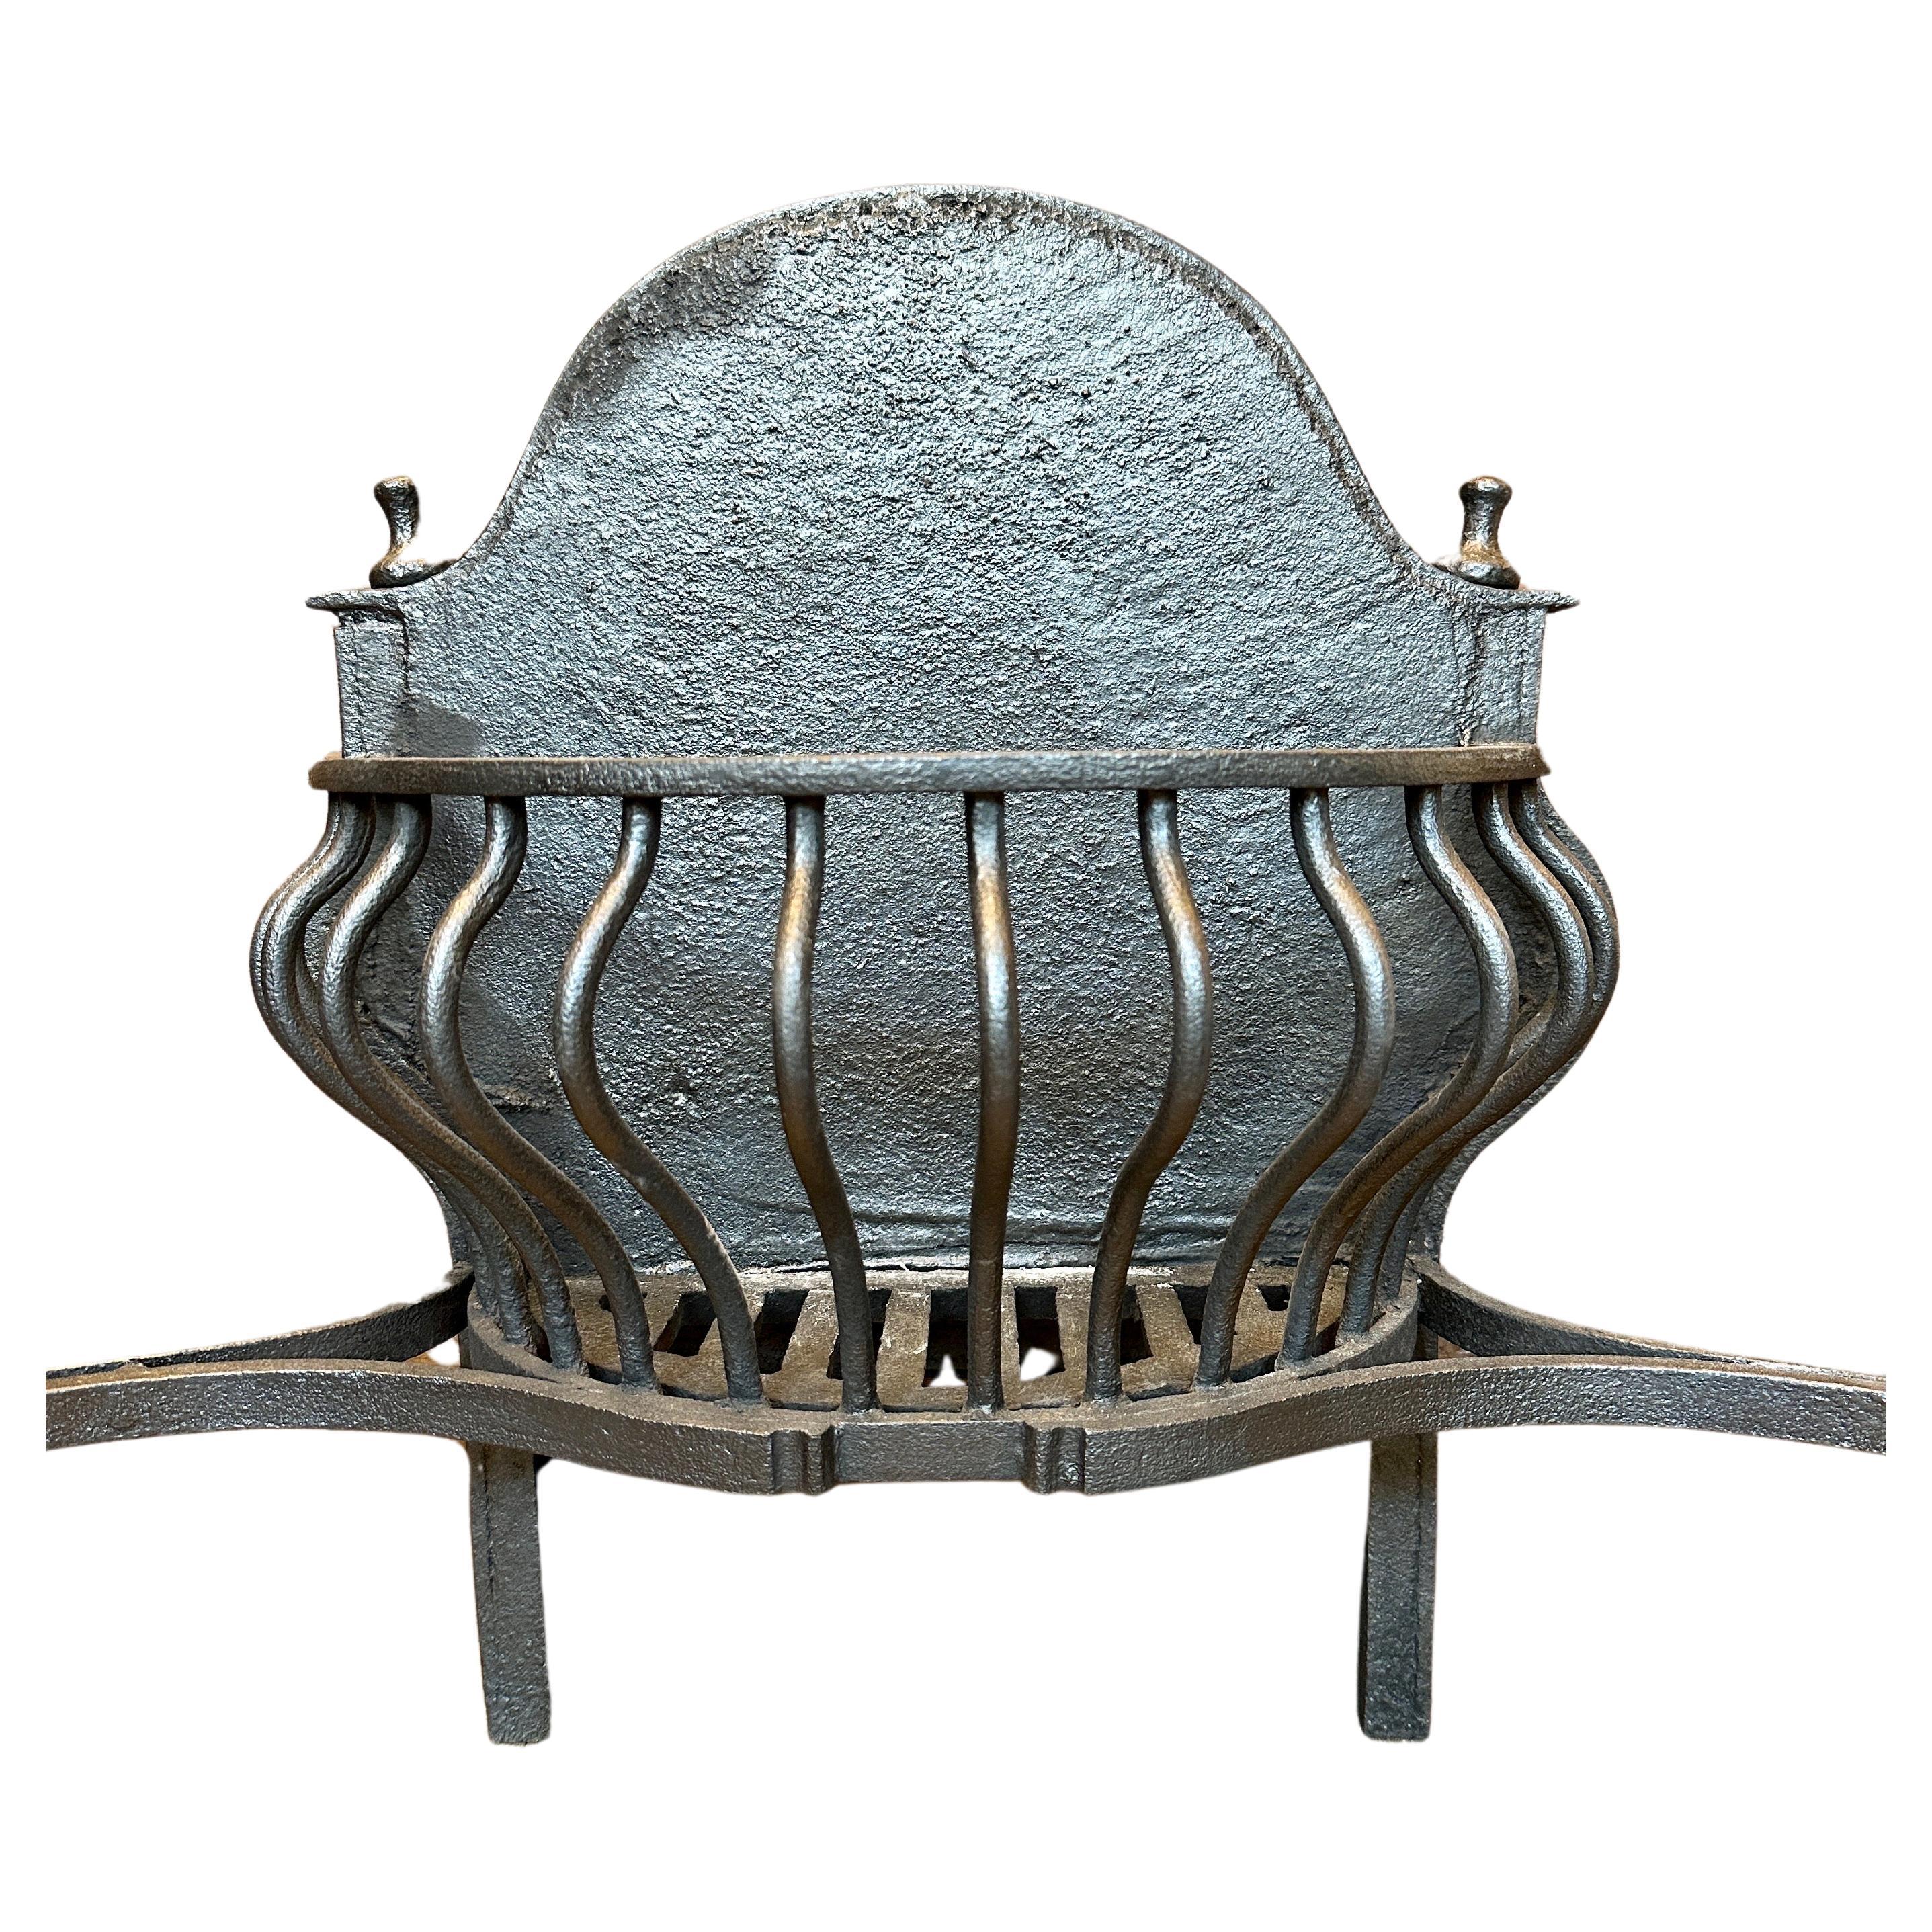 A large and impressive Gothic Revival fire grate in wrought iron with brick fire back. The front supports swept out on splayed feet with curved elongated uprights with dragons heads with ringed mouths. The burning area of curved balustrade bars and